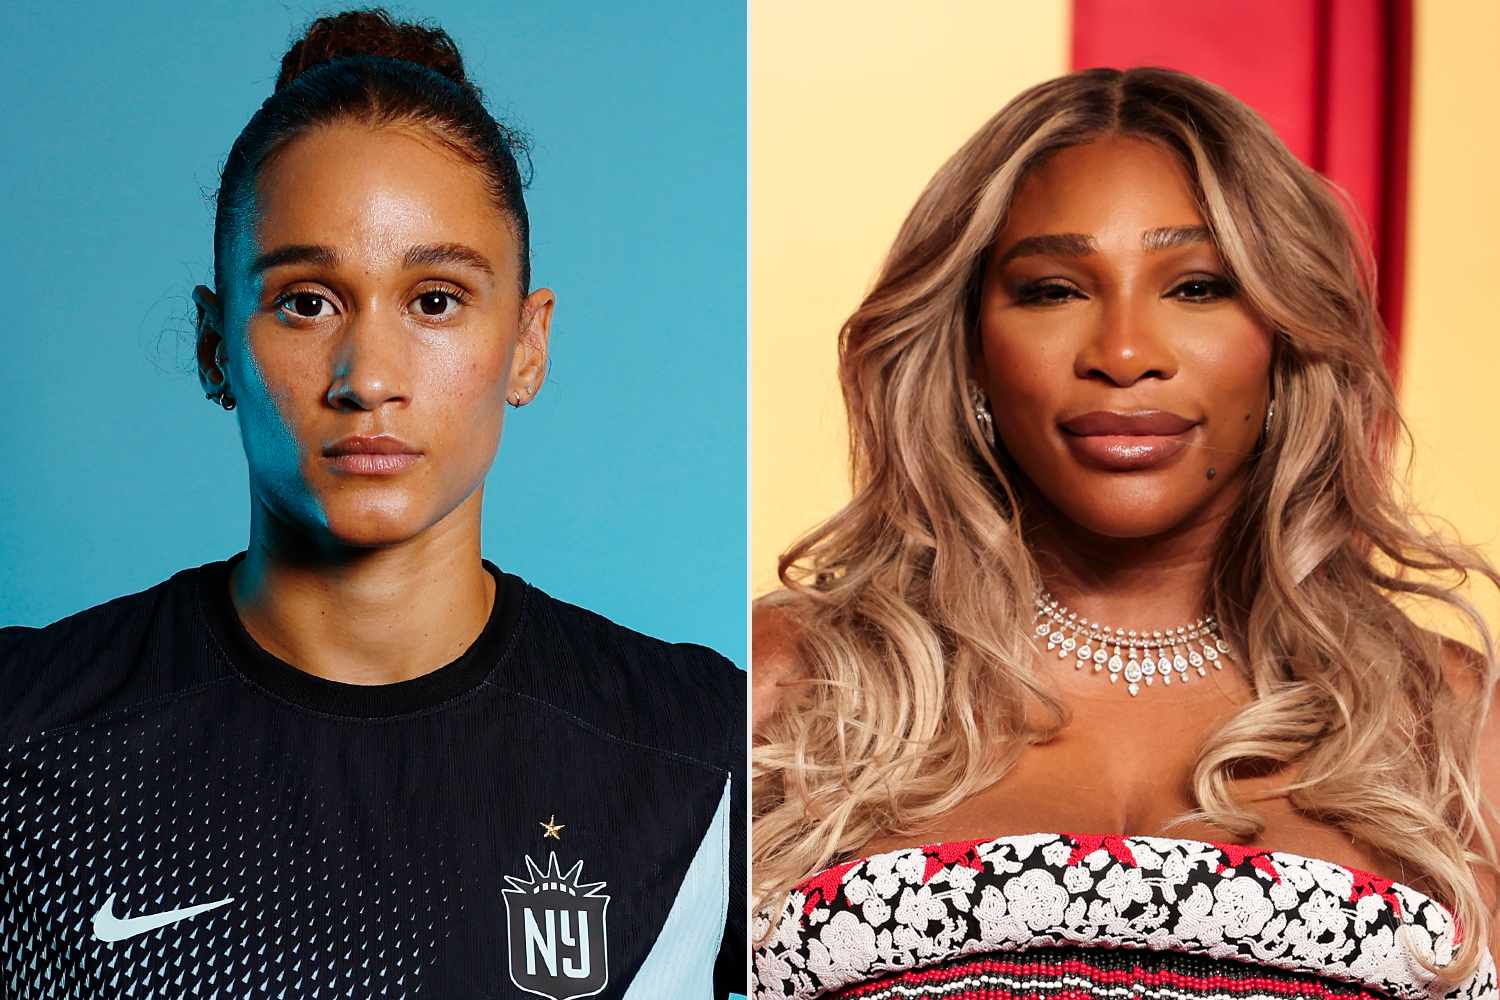 NWSL Star Lynn Williams Clarifies She's Not Related to Serena Williams — but Wants to 'Keep the Joke Going'